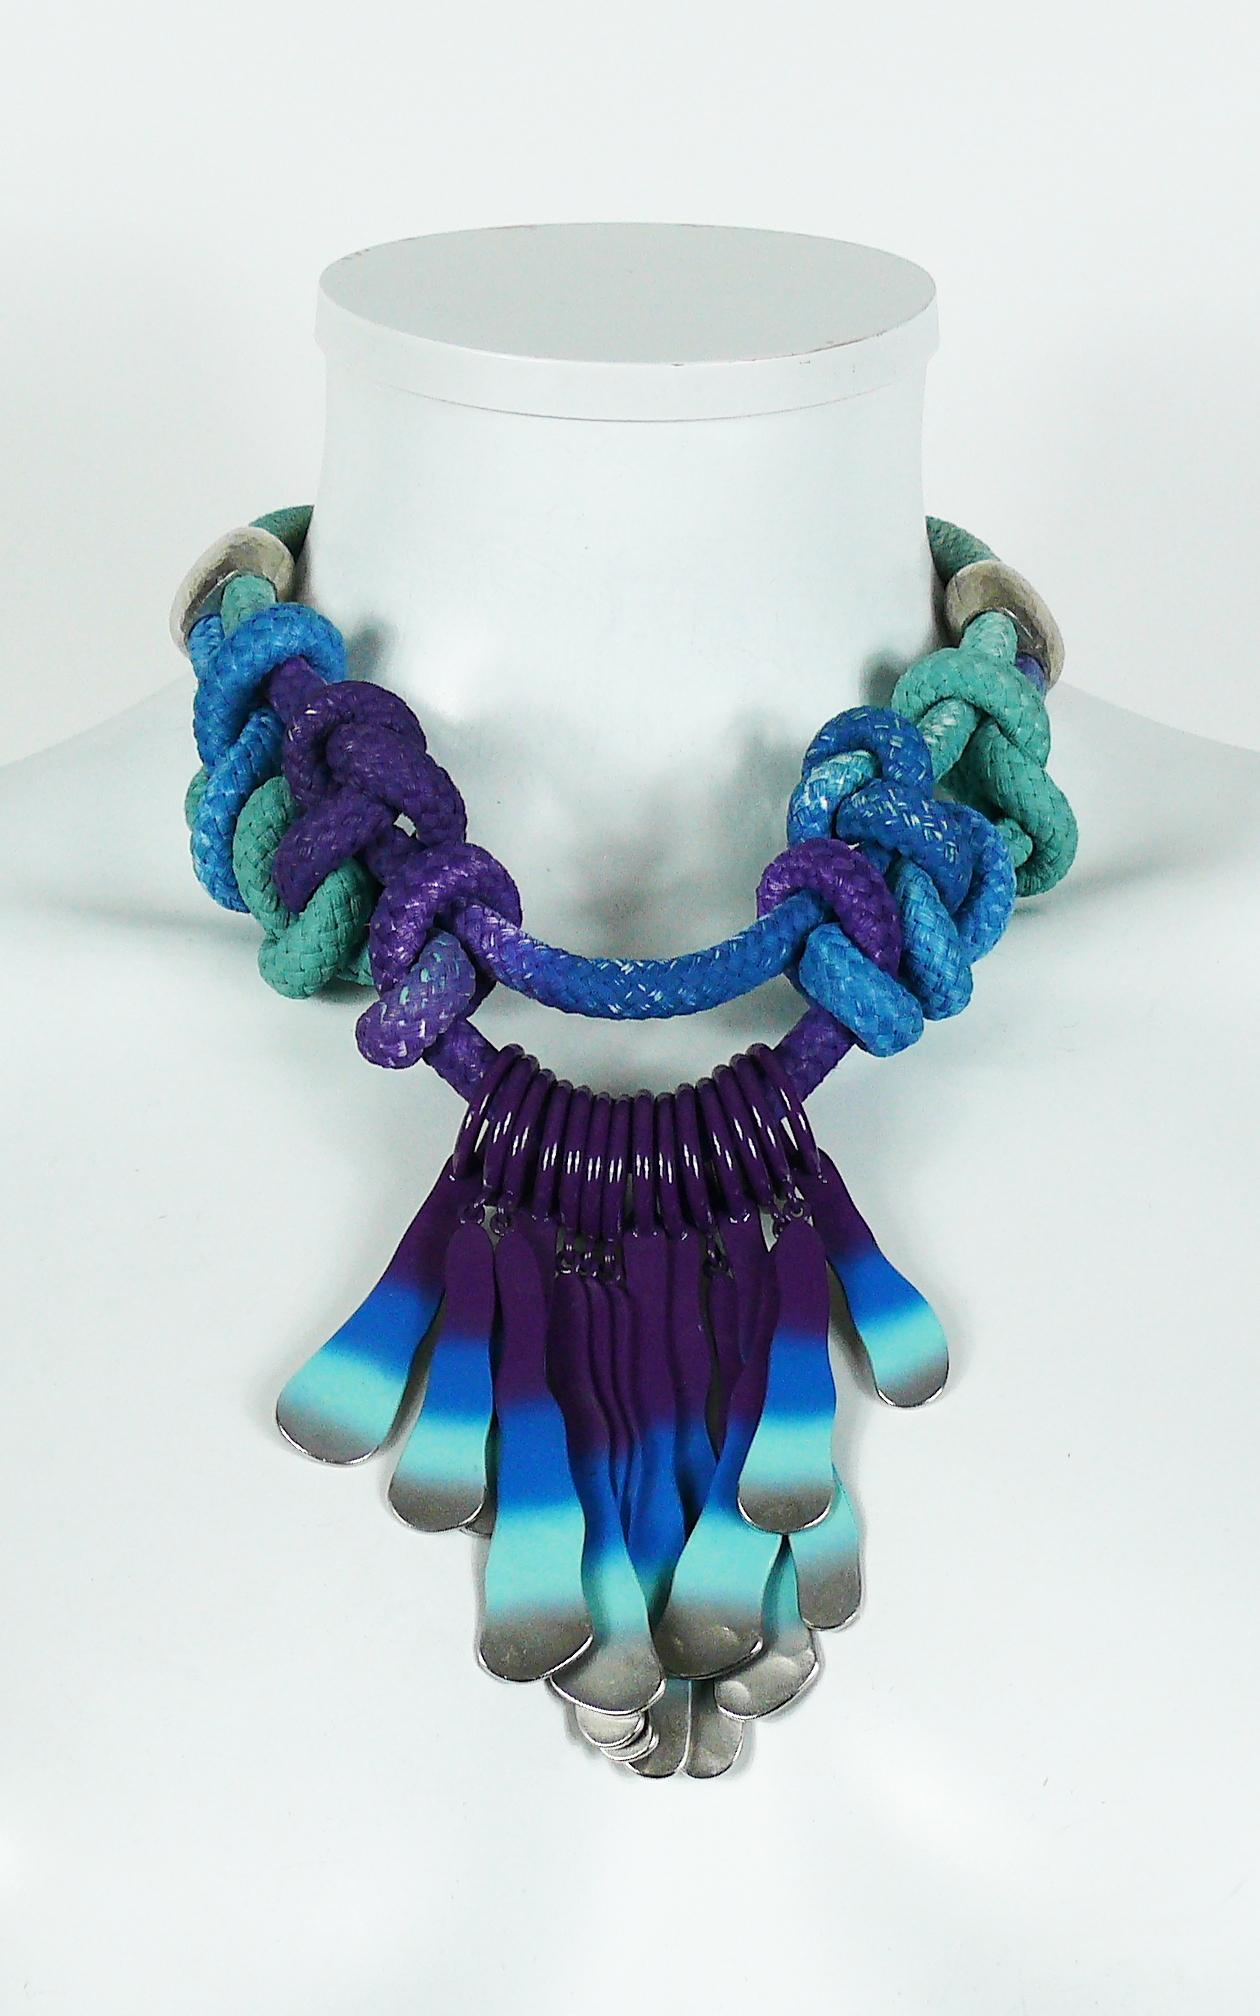 Christian Dior blue/purple rope runway necklace featuring enameled charms and silver toned hardware.

Spring/Summer 2011 Ready-To-Wear Collection.

Embossed DIOR.

Indicative measurements : length approx. 45 cm (17.72 inches).

JEWELRY CONDITION